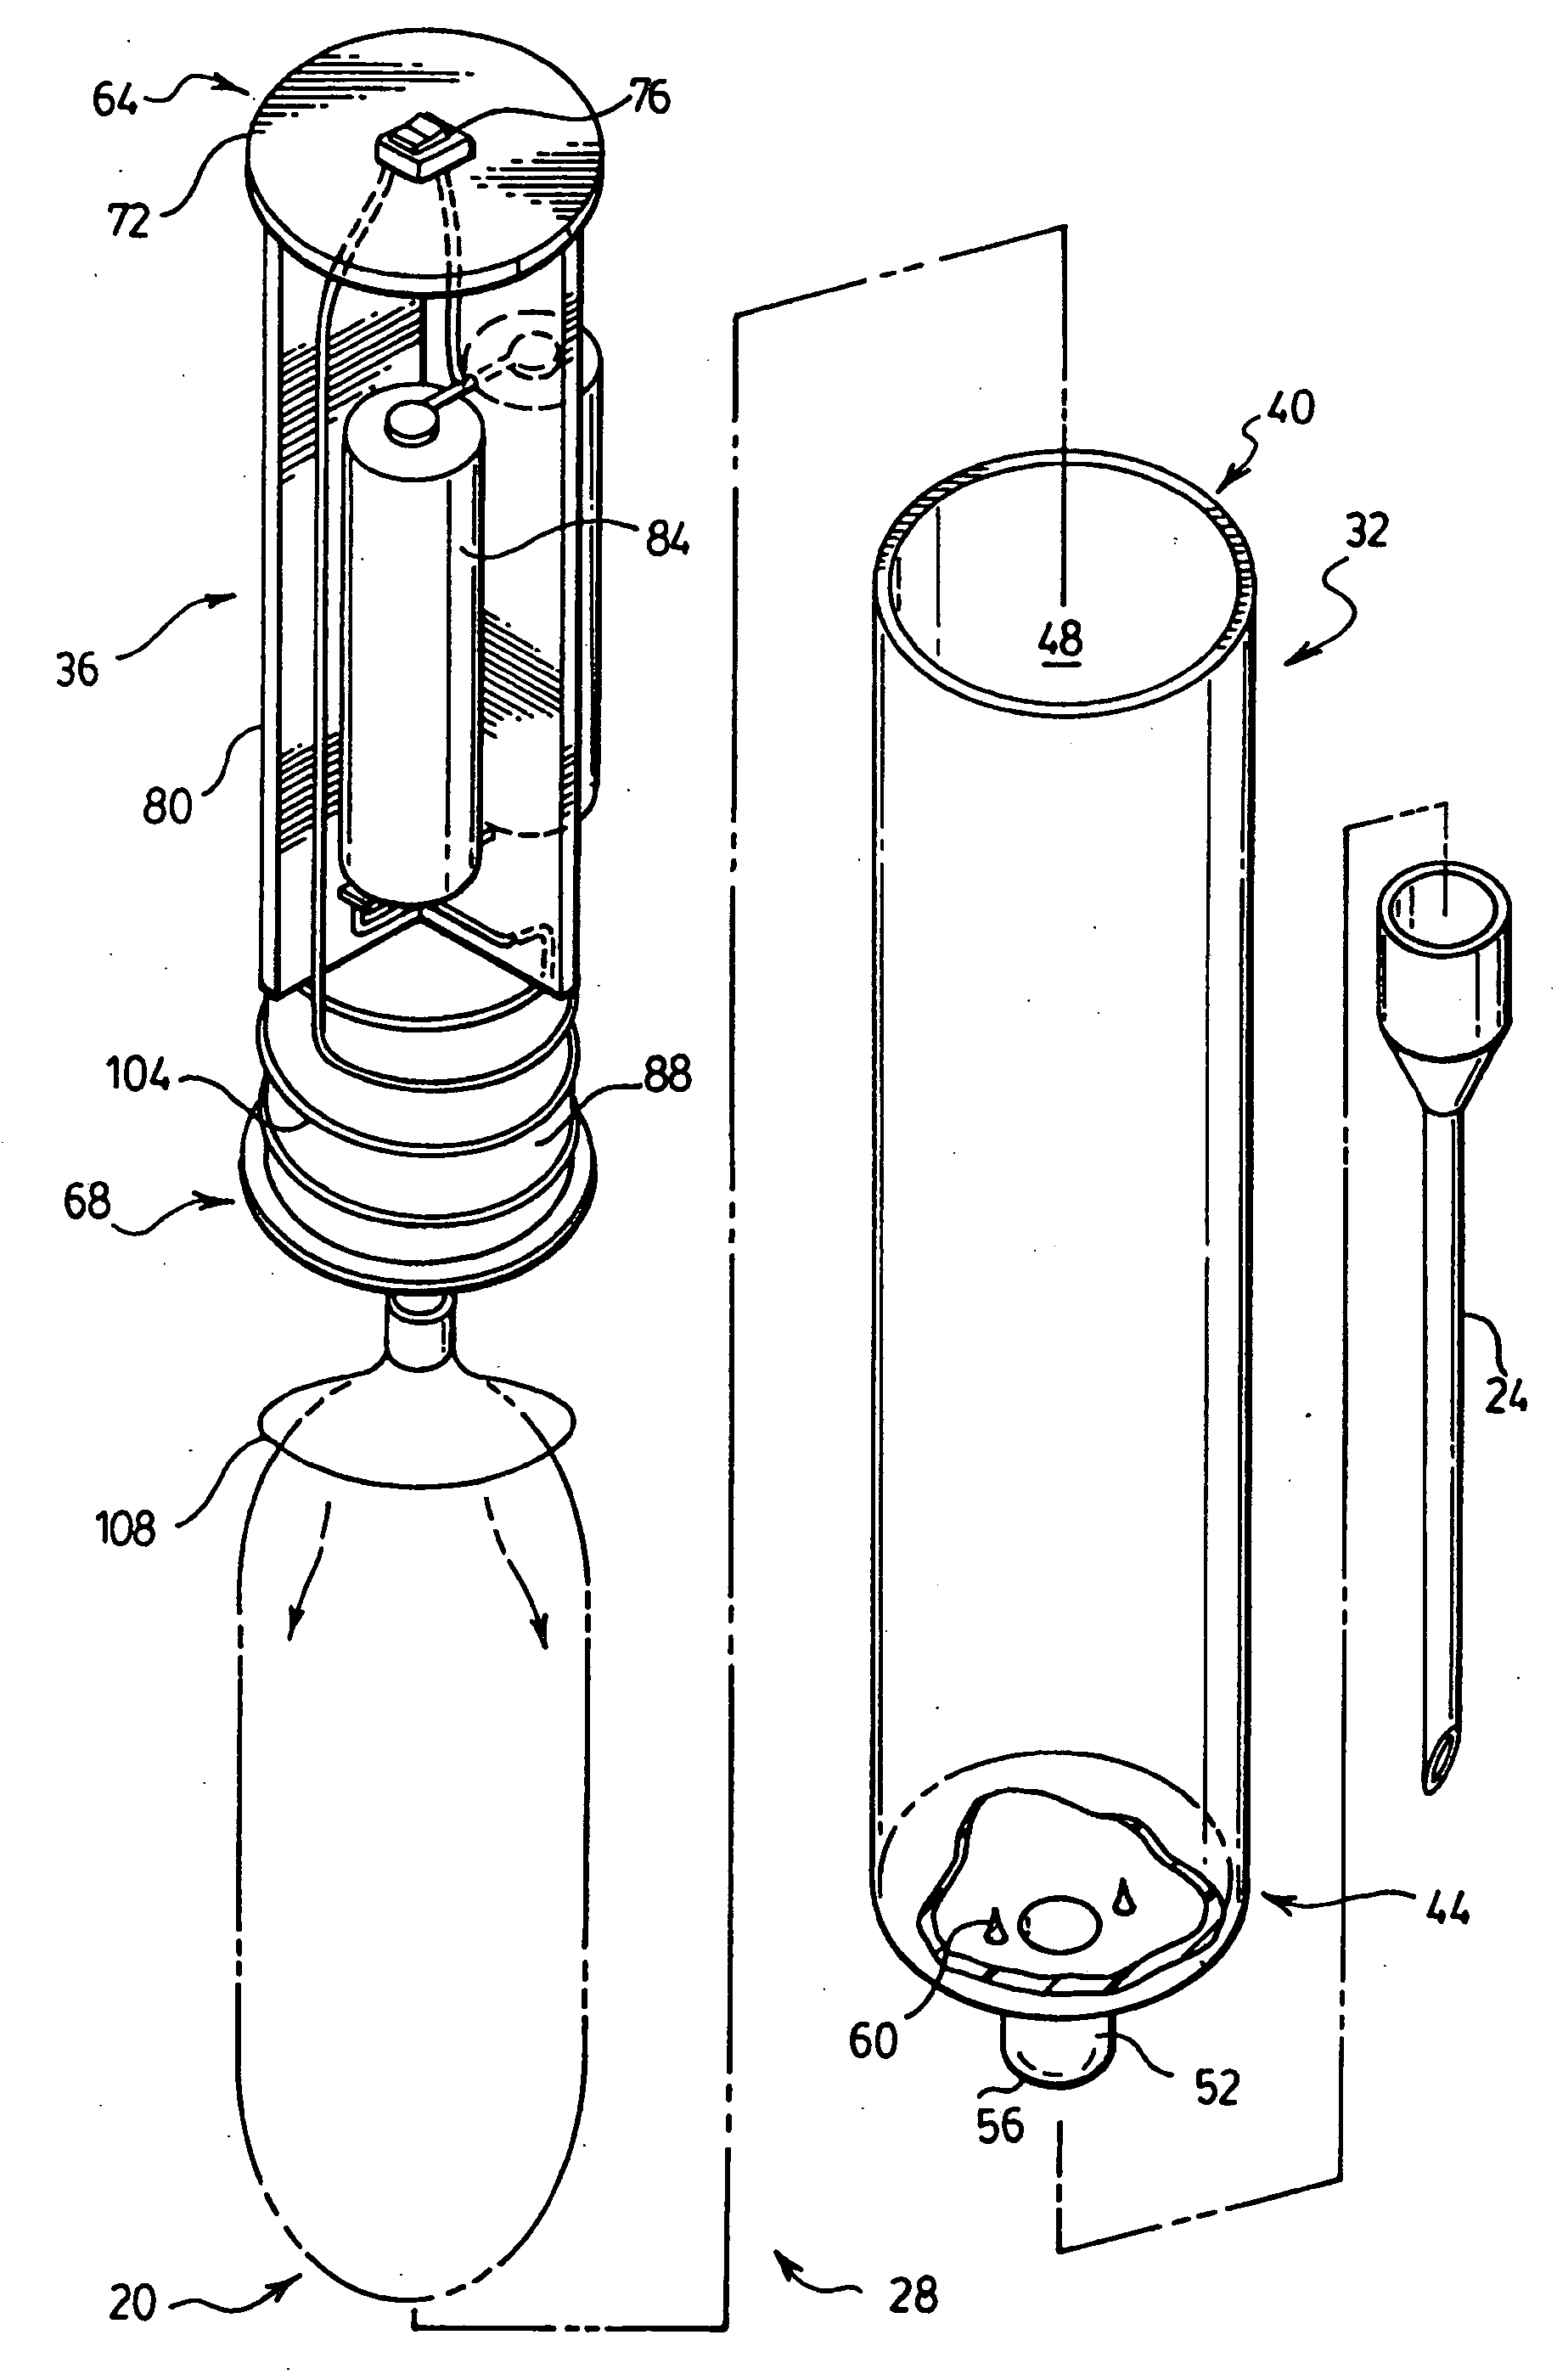 Apparatus and method for administering a therapeutic agent into tissue